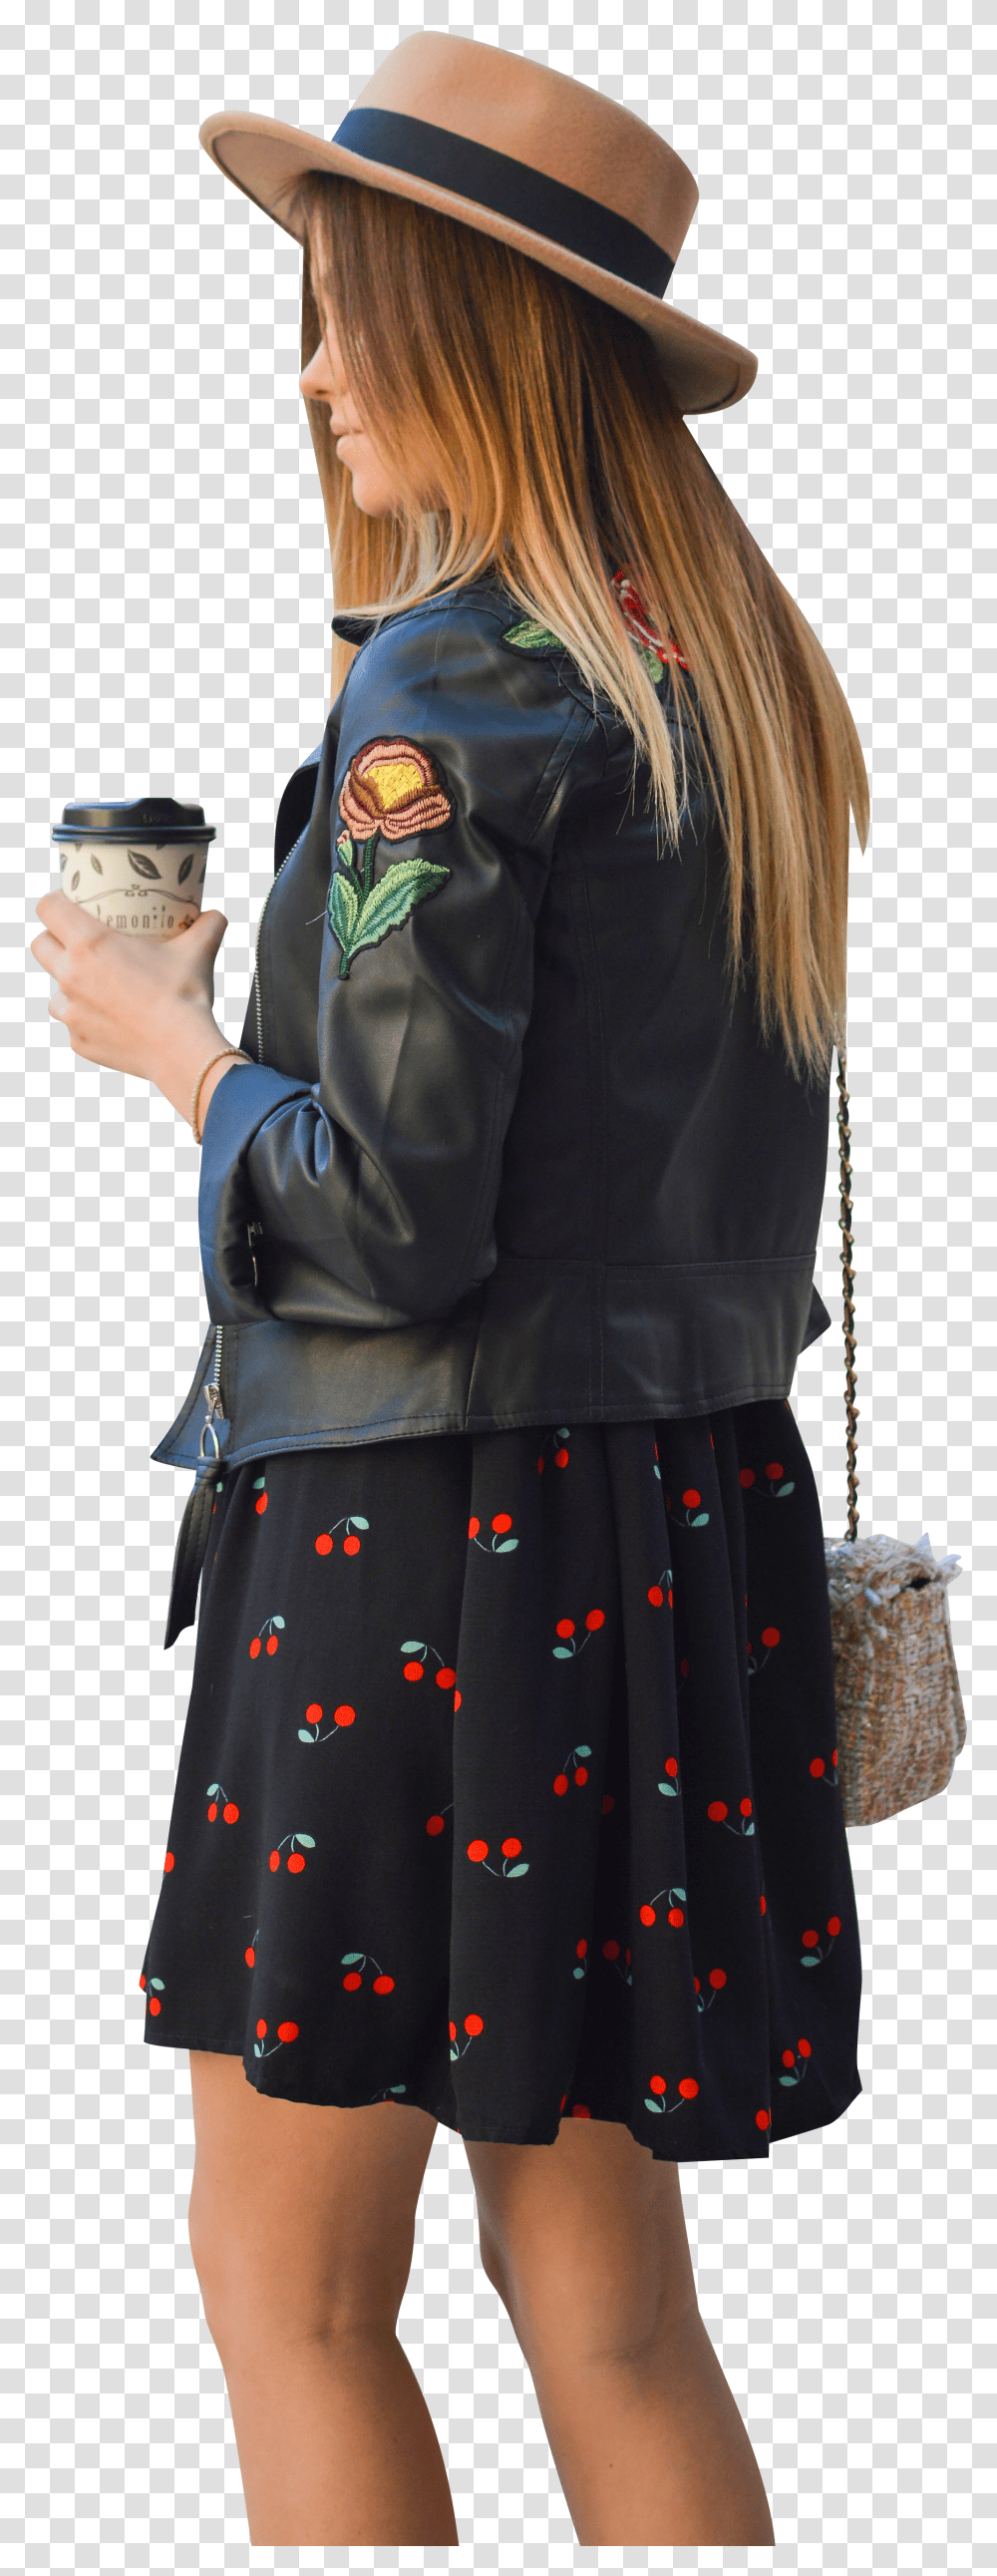 Woman Wearing Floral Black Jacket And Cherry Skirt Floral Dress With Leather Jacket Transparent Png